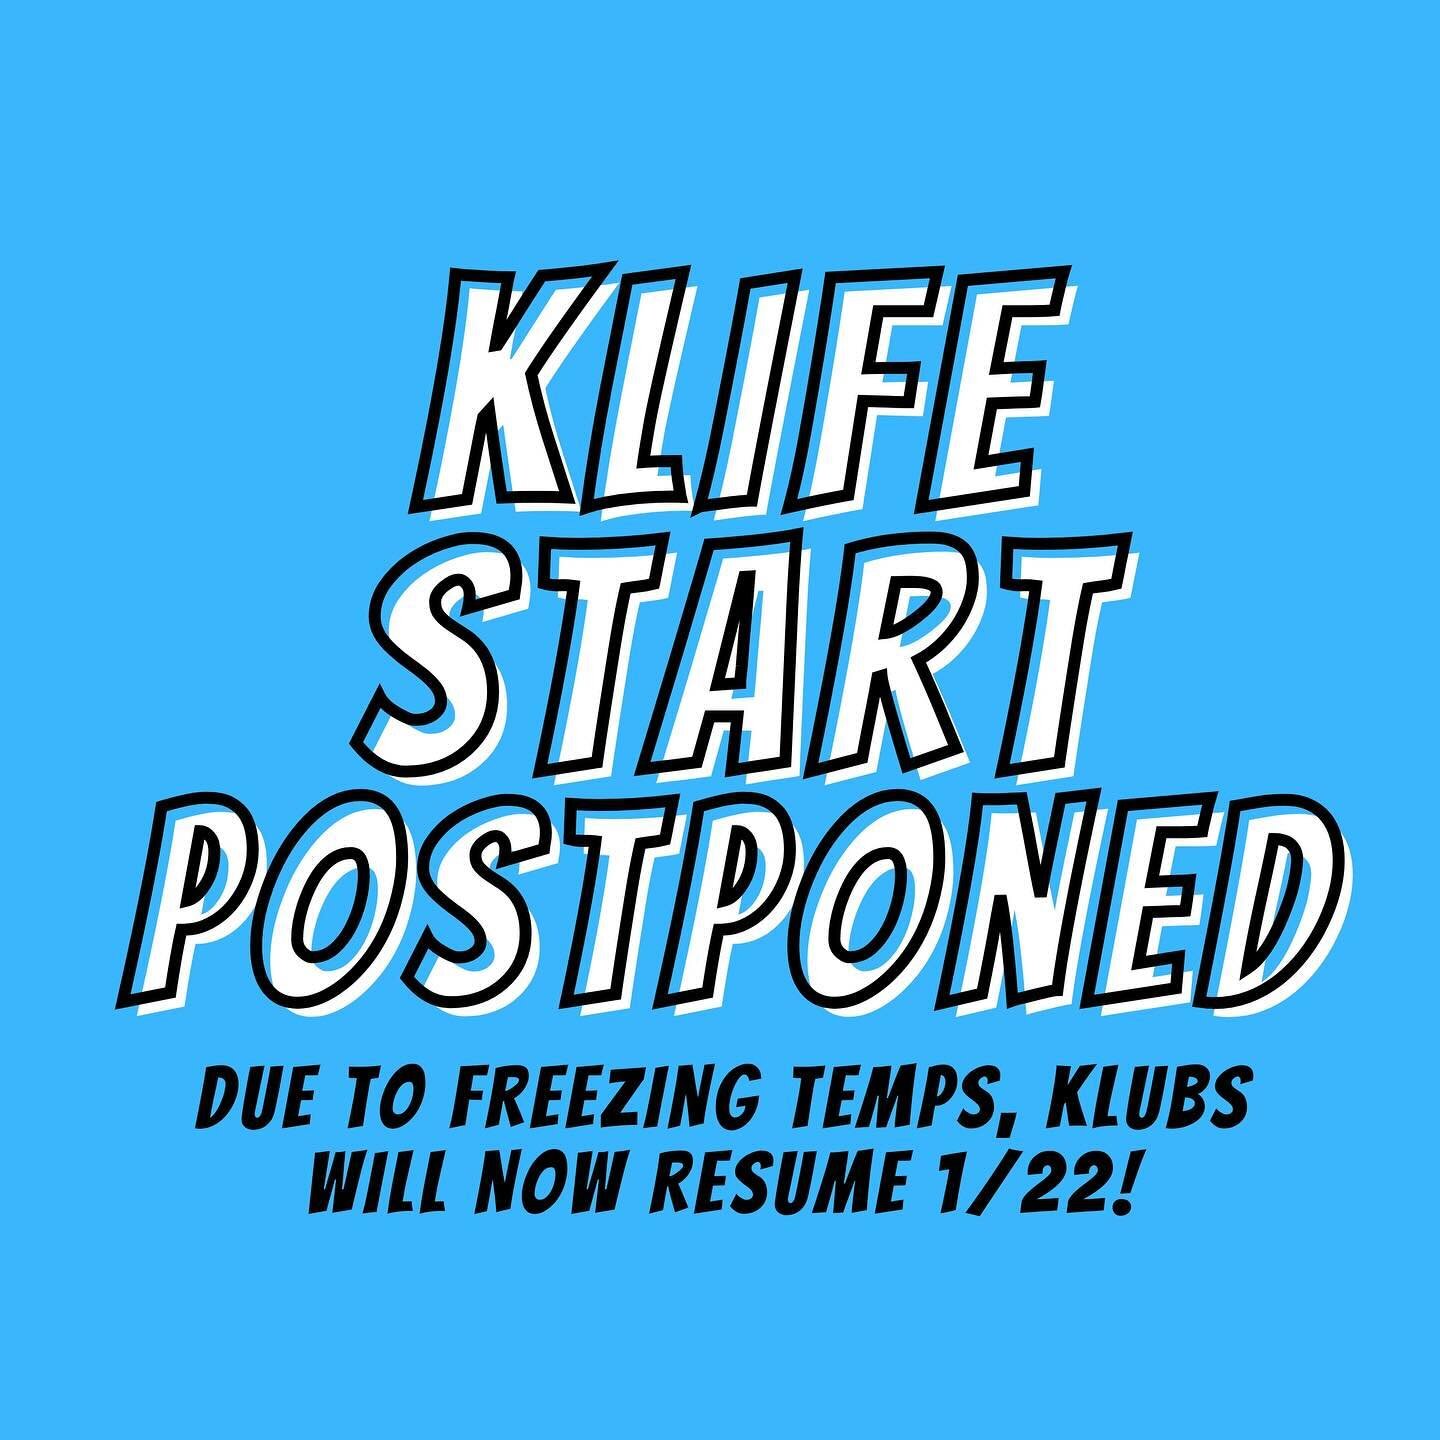 The new year has brought crazy low temps our way! 🥶 Due to the weather forecast this Monday, our MS &amp; HS Klubs will now resume for the spring semester 1/22.

-Super K will still resume meeting Thursday, 1/18!
-Lookout for communication from your